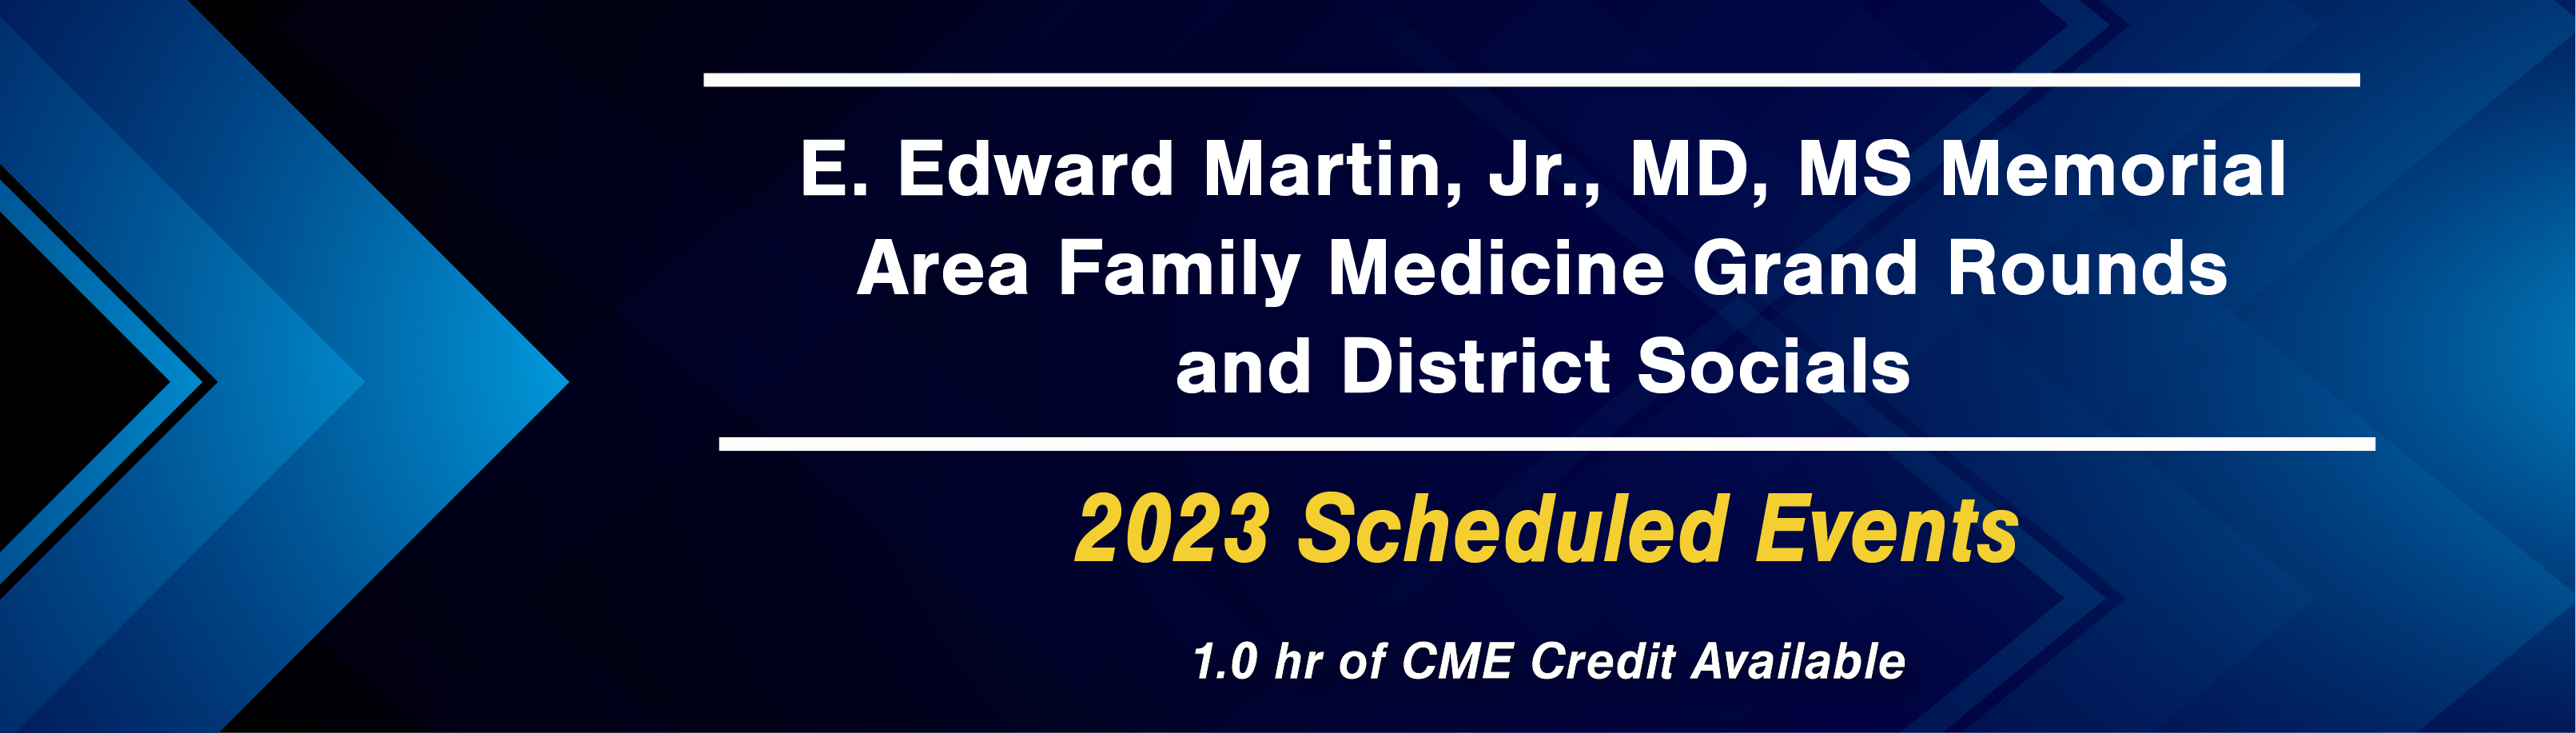 2023 Grand Rounds web banner